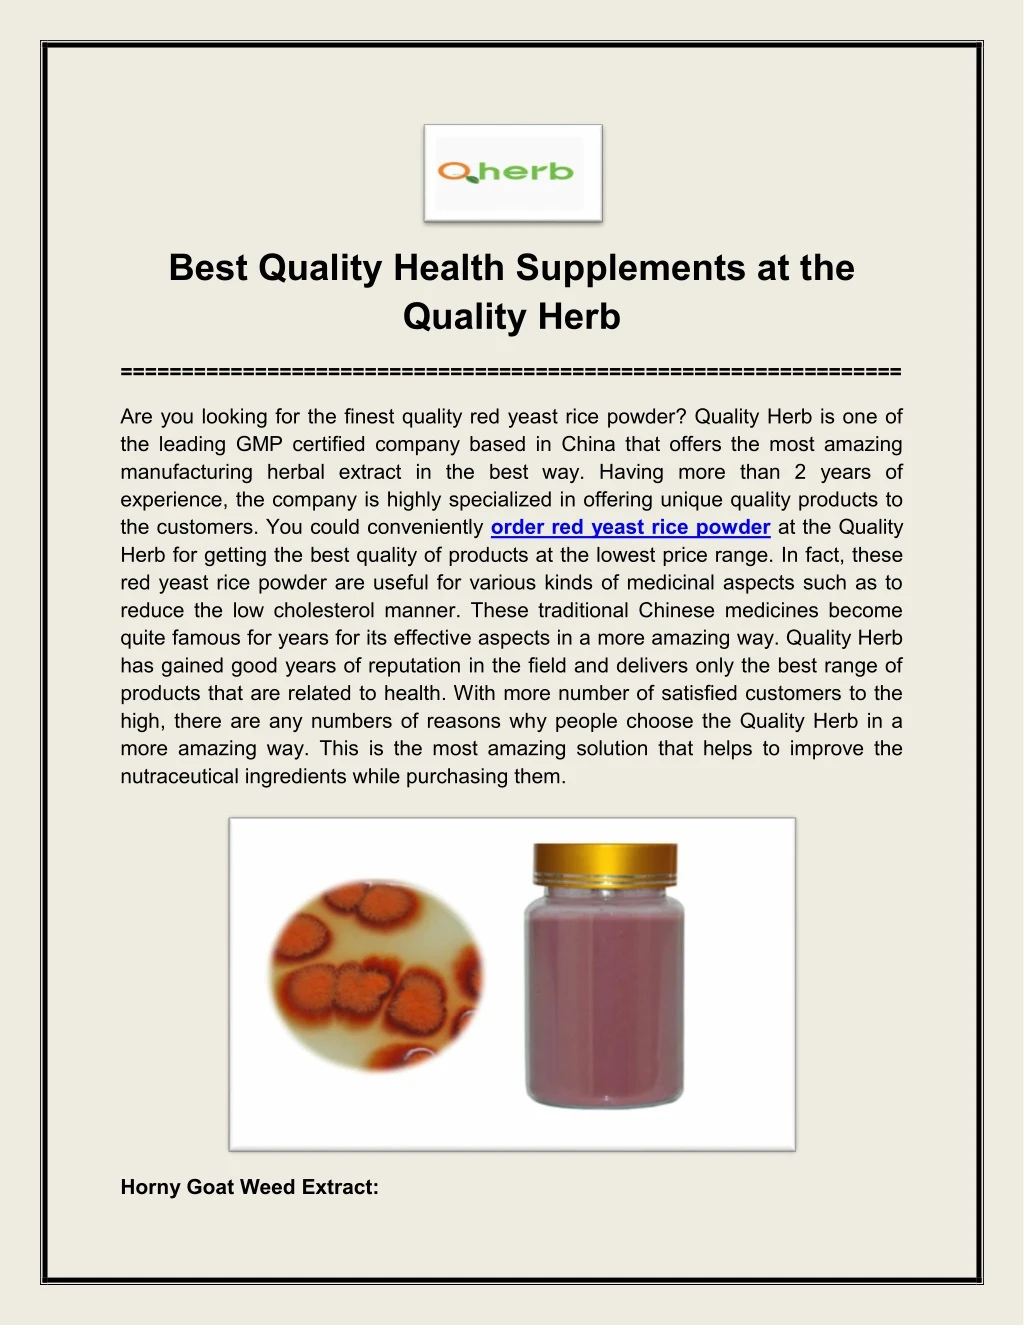 best quality health supplements at the quality